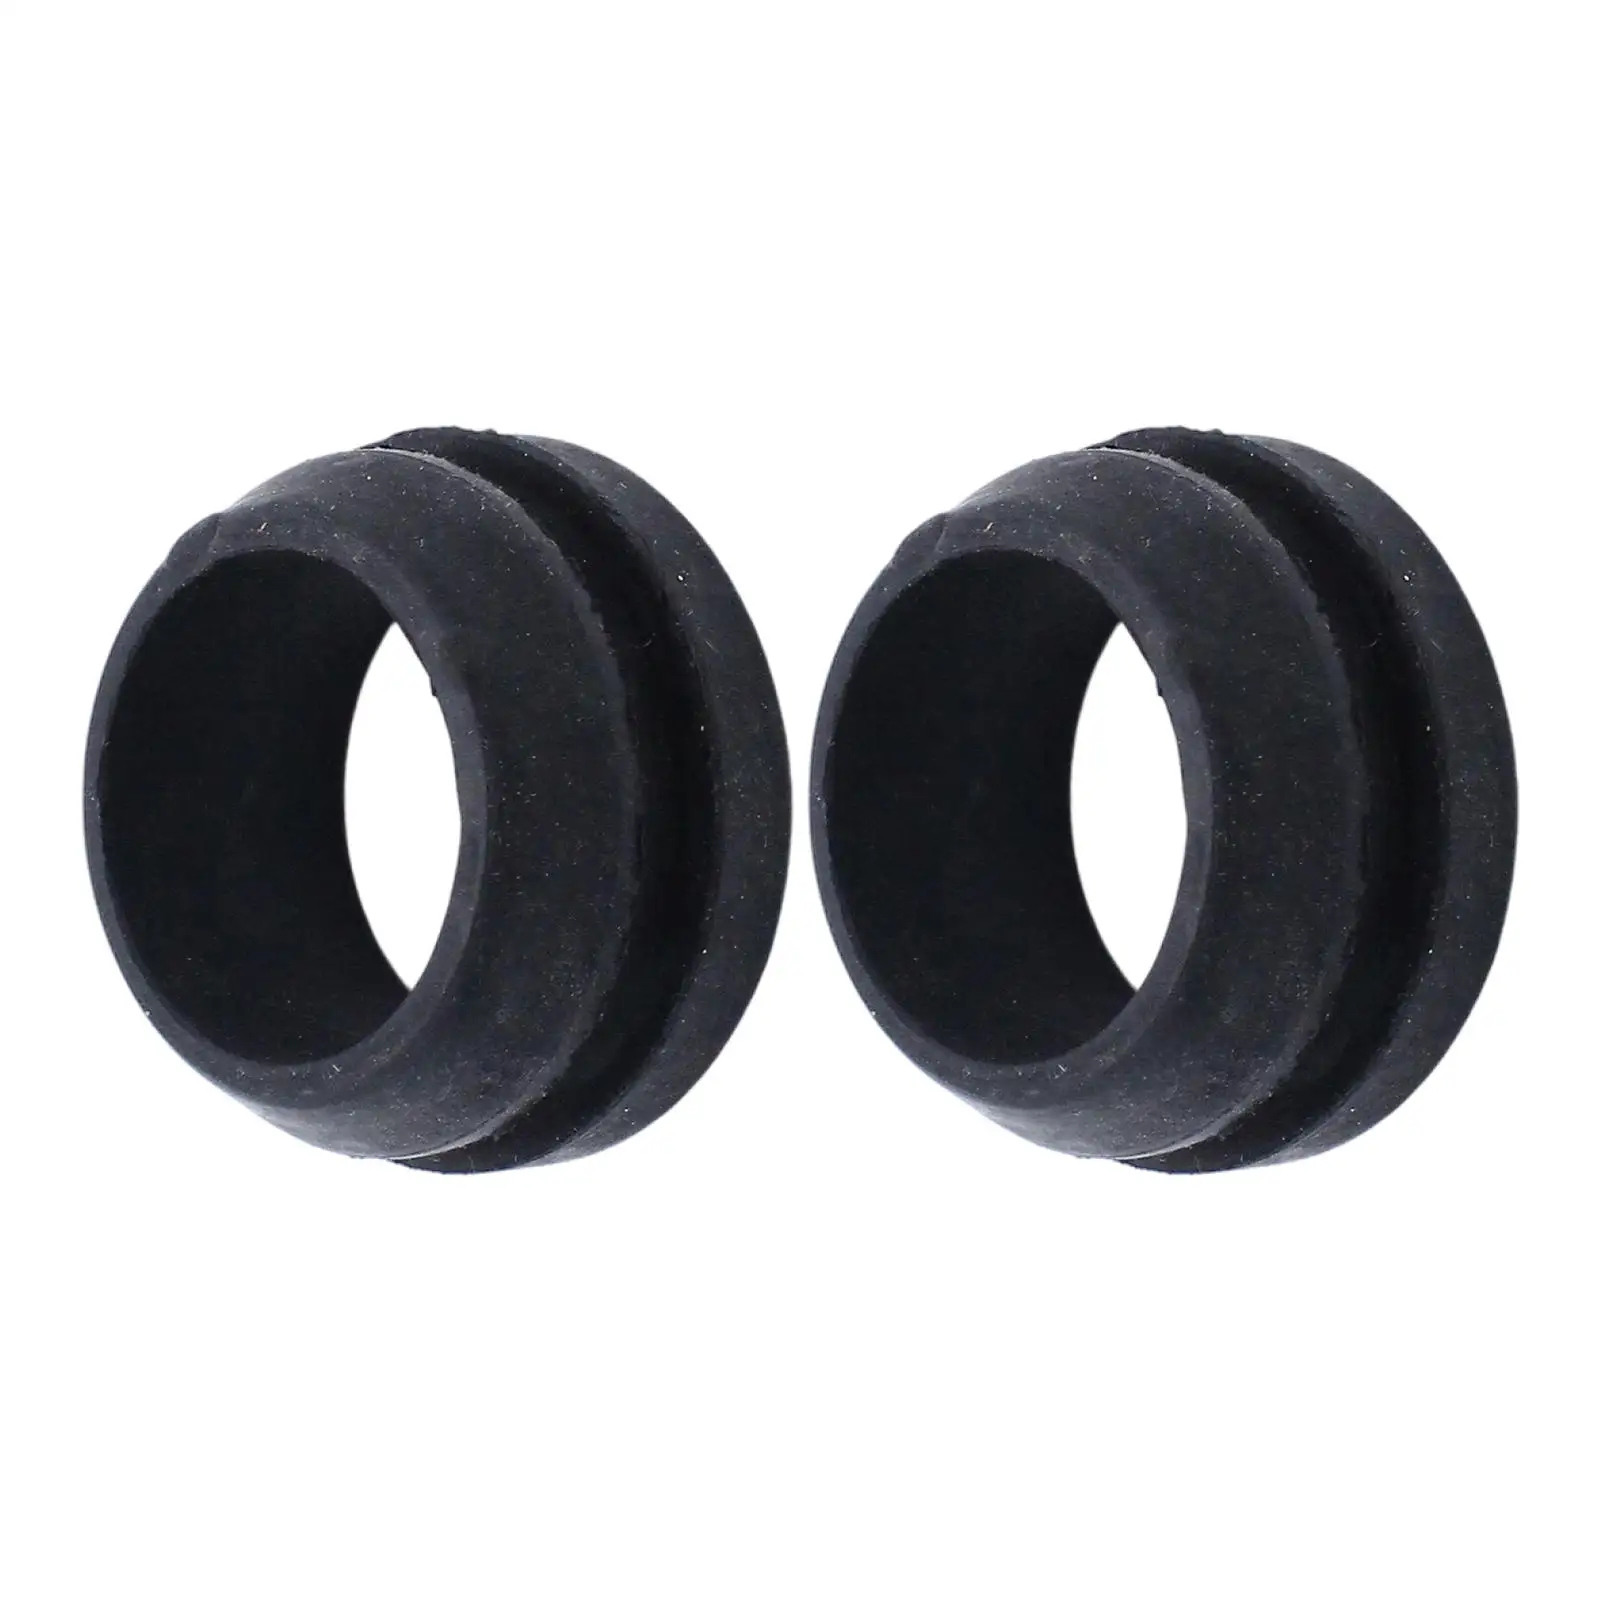 2Pcs High Temp Rubber Breather Pcv Grommets Replacement for Metal Valve Cover 4880 4998 Components Sbc Sbf 350 1/4